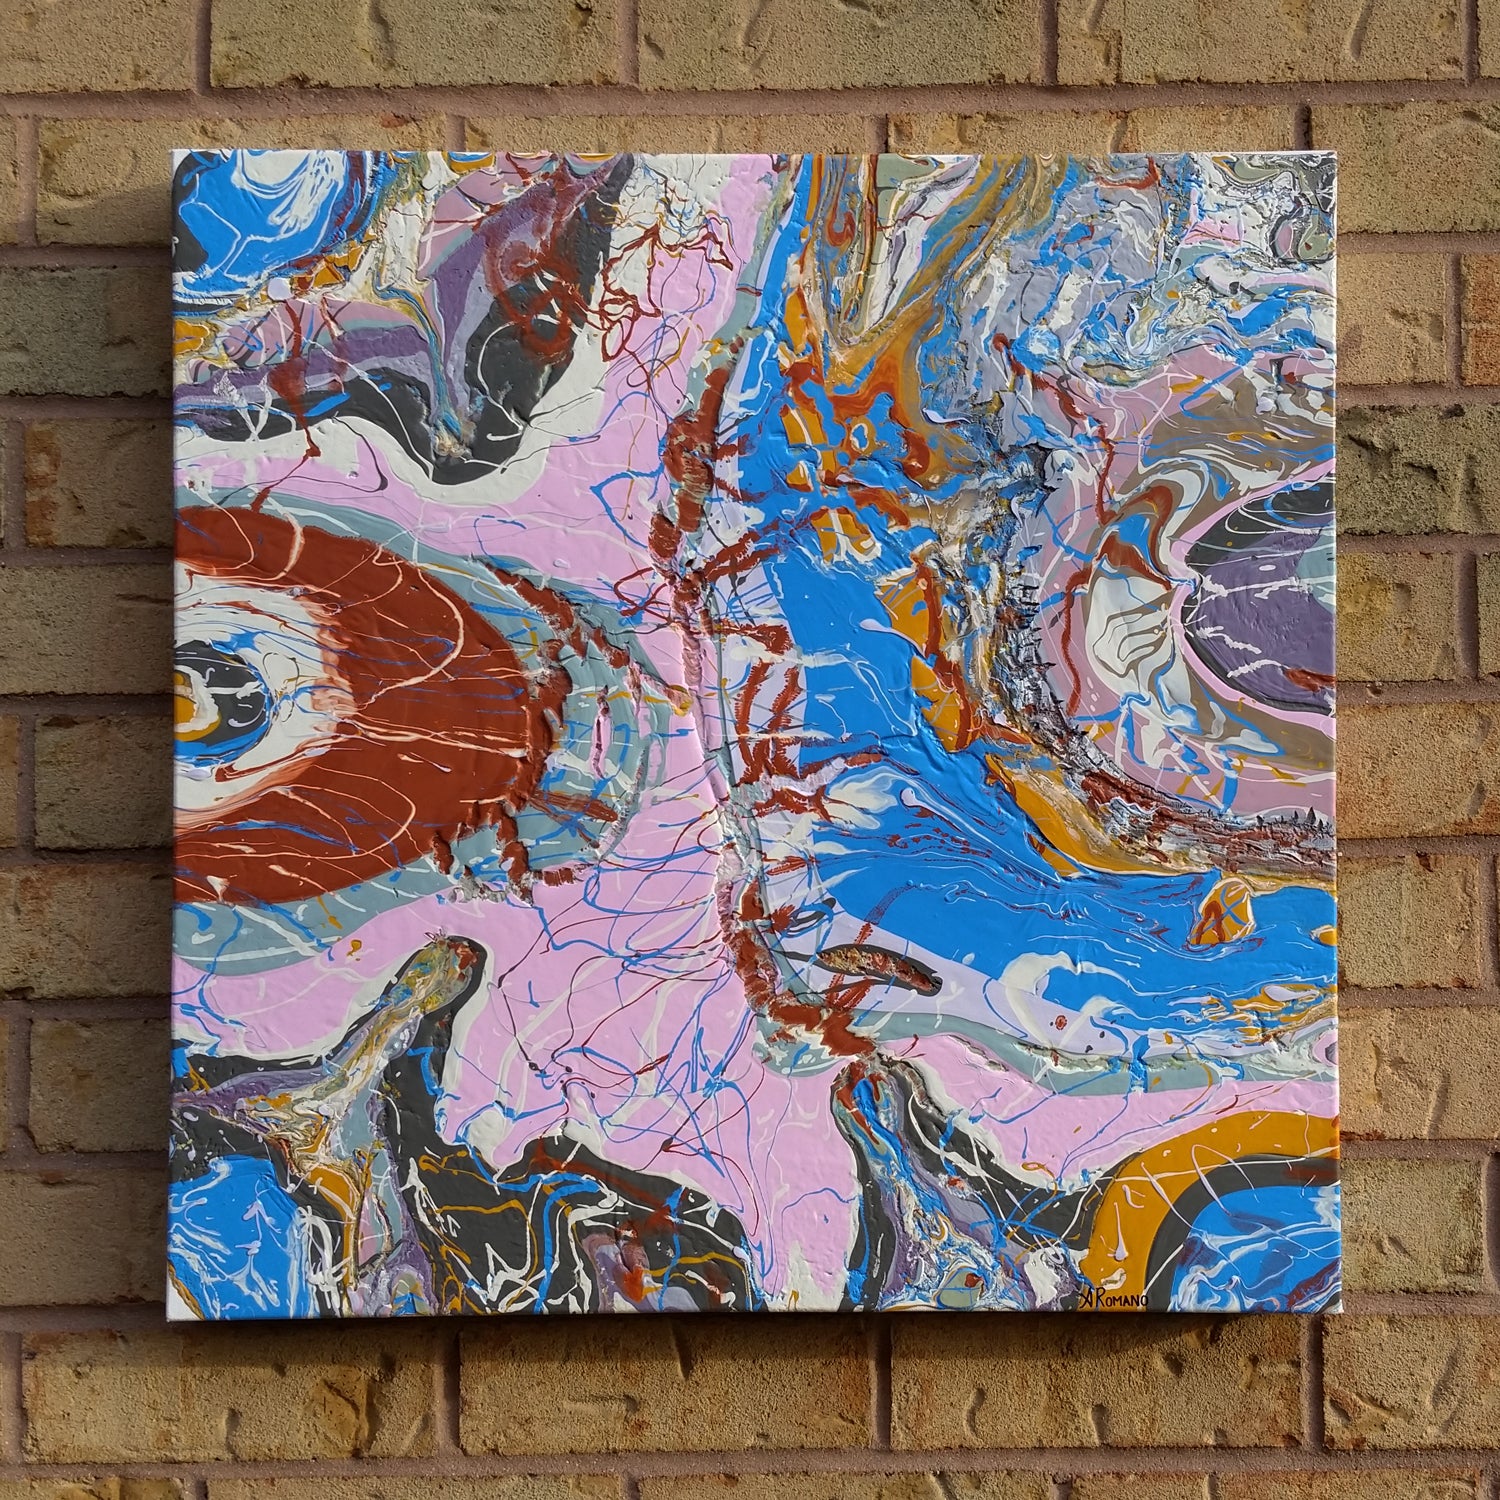 Tectonic-Plates-by-Alexandra-Romano-Original-Abstract-Painting-Art-for-Sale-Online-Shopping-Toronto